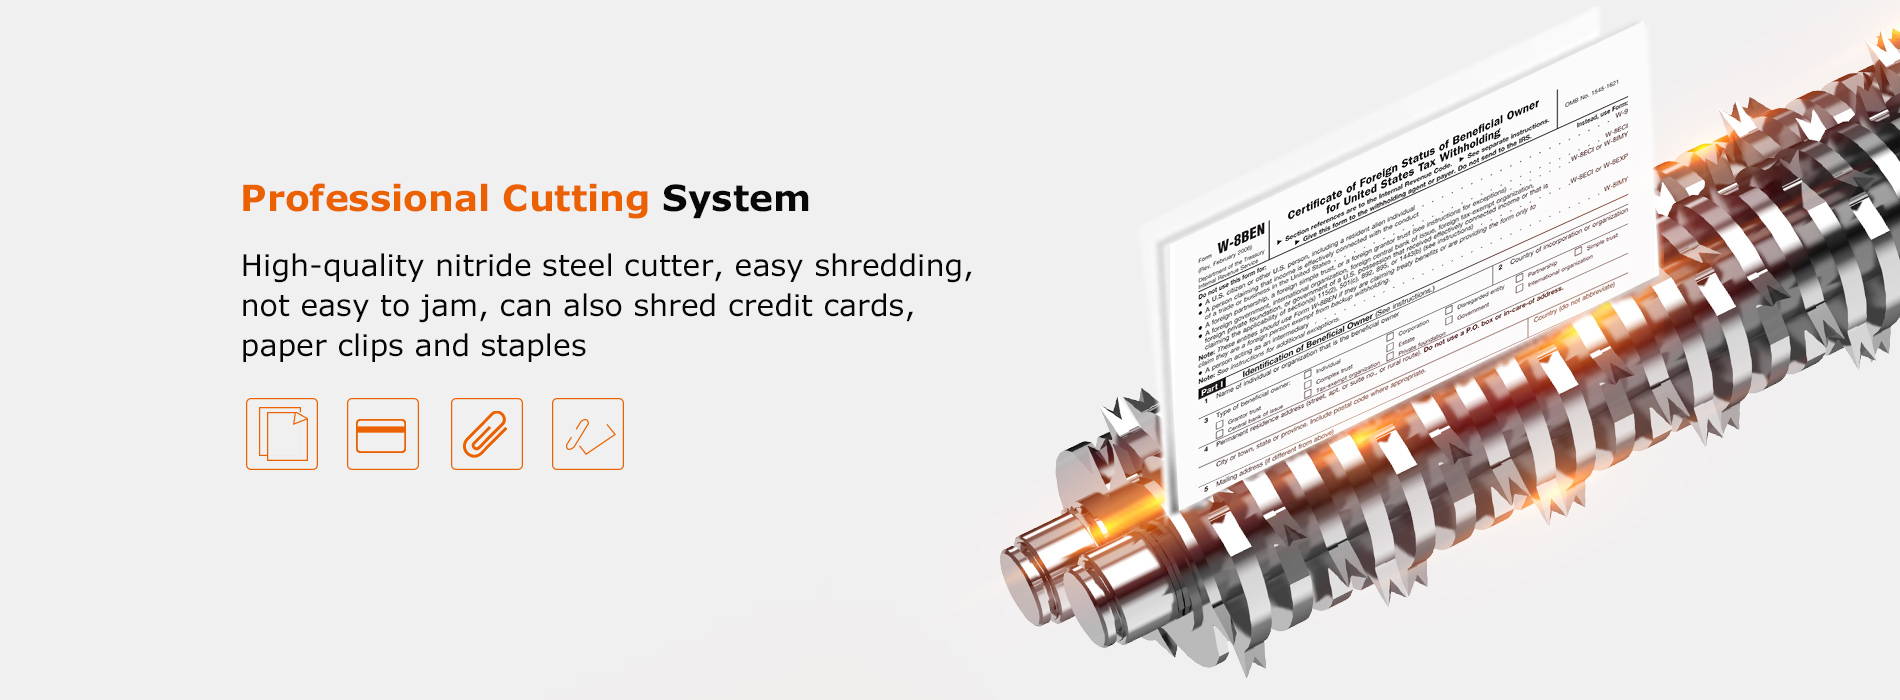 Professional Cutting System  High-quality nitride steel cutter, easy shredding, not easy to jam, can also shred credit cards, paper clips and staples 